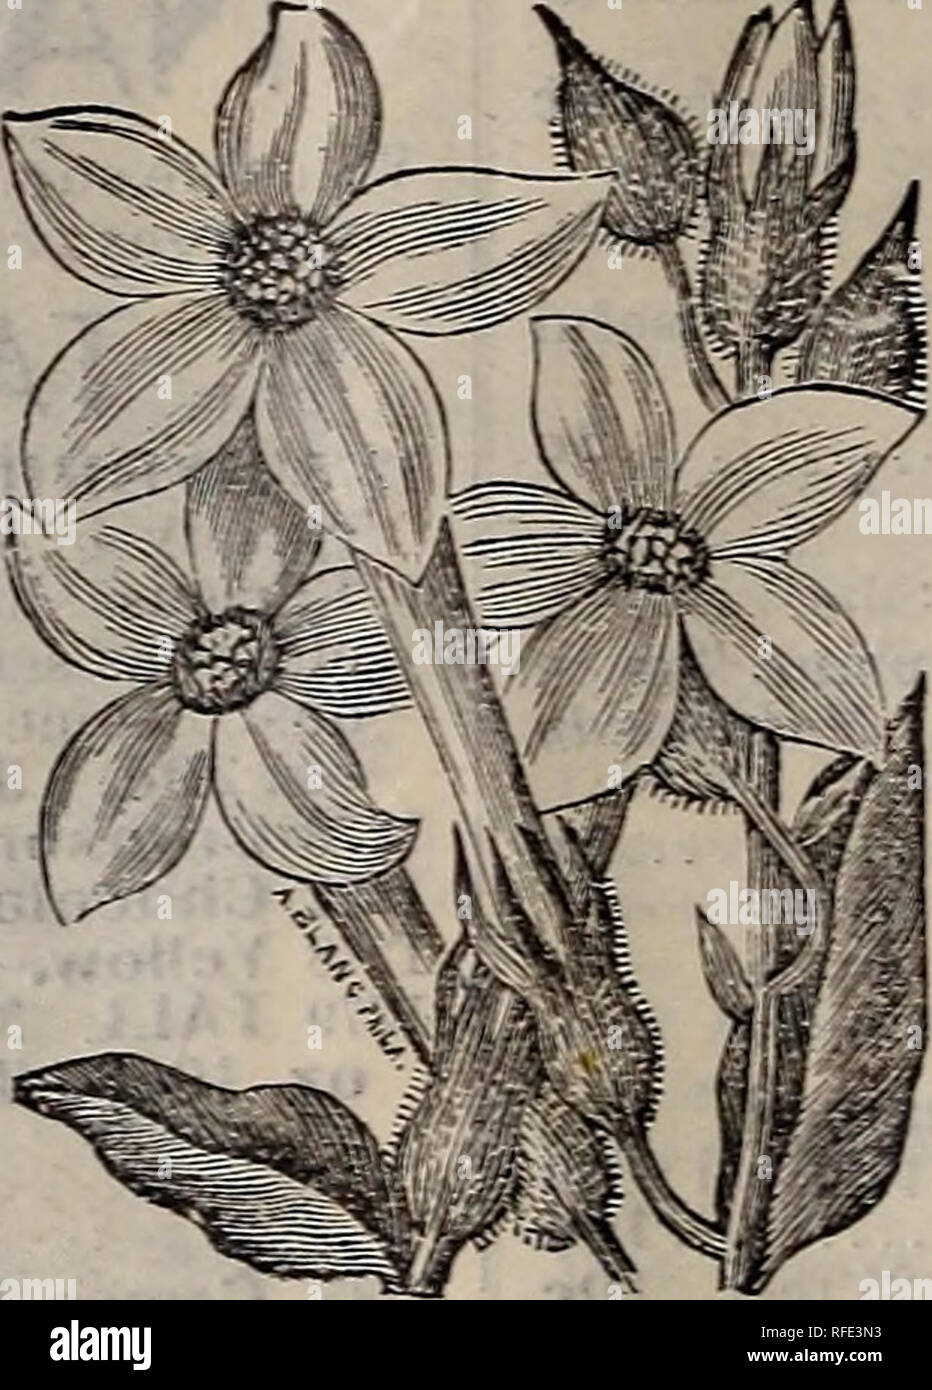 . Rennie's 1902. Nursery stock Ontario Catalogs; Seeds Catalogs; Vegetables Seeds Catalogs; Flowers Seeds Catalogs; Gardening Equipment and supplies Catalogs; Bulbs (Plants) Catalogs; Bee culture Equipment and supplies Catalogs. PANSIES. Giant Curled &quot; Masterpiece &quot; Pansy. INICOTIANA. 1259 AFFINIS (Sweet-Scented Tobacco Plant.) —Large, pure -white flowers -which expand fully in the morning and evening, emitting a delicious fragrance. If cut and potted will hlooni all -winter oc 1260 Giant Red Flowering. — Suitable for the lawn, flowers dark red, leaves large 5c MYCTERIINIA. Beautiful Stock Photo